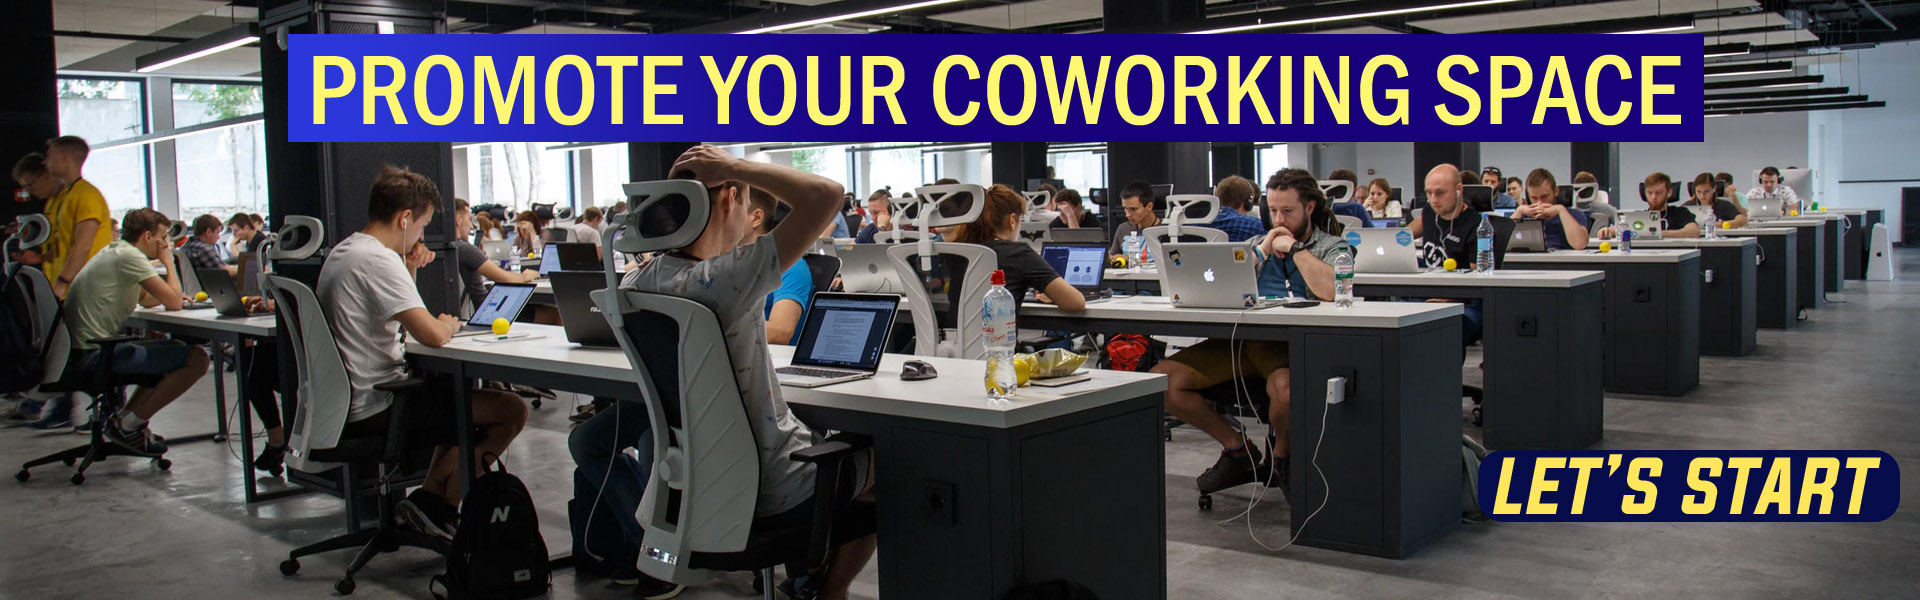 coworking space promotion